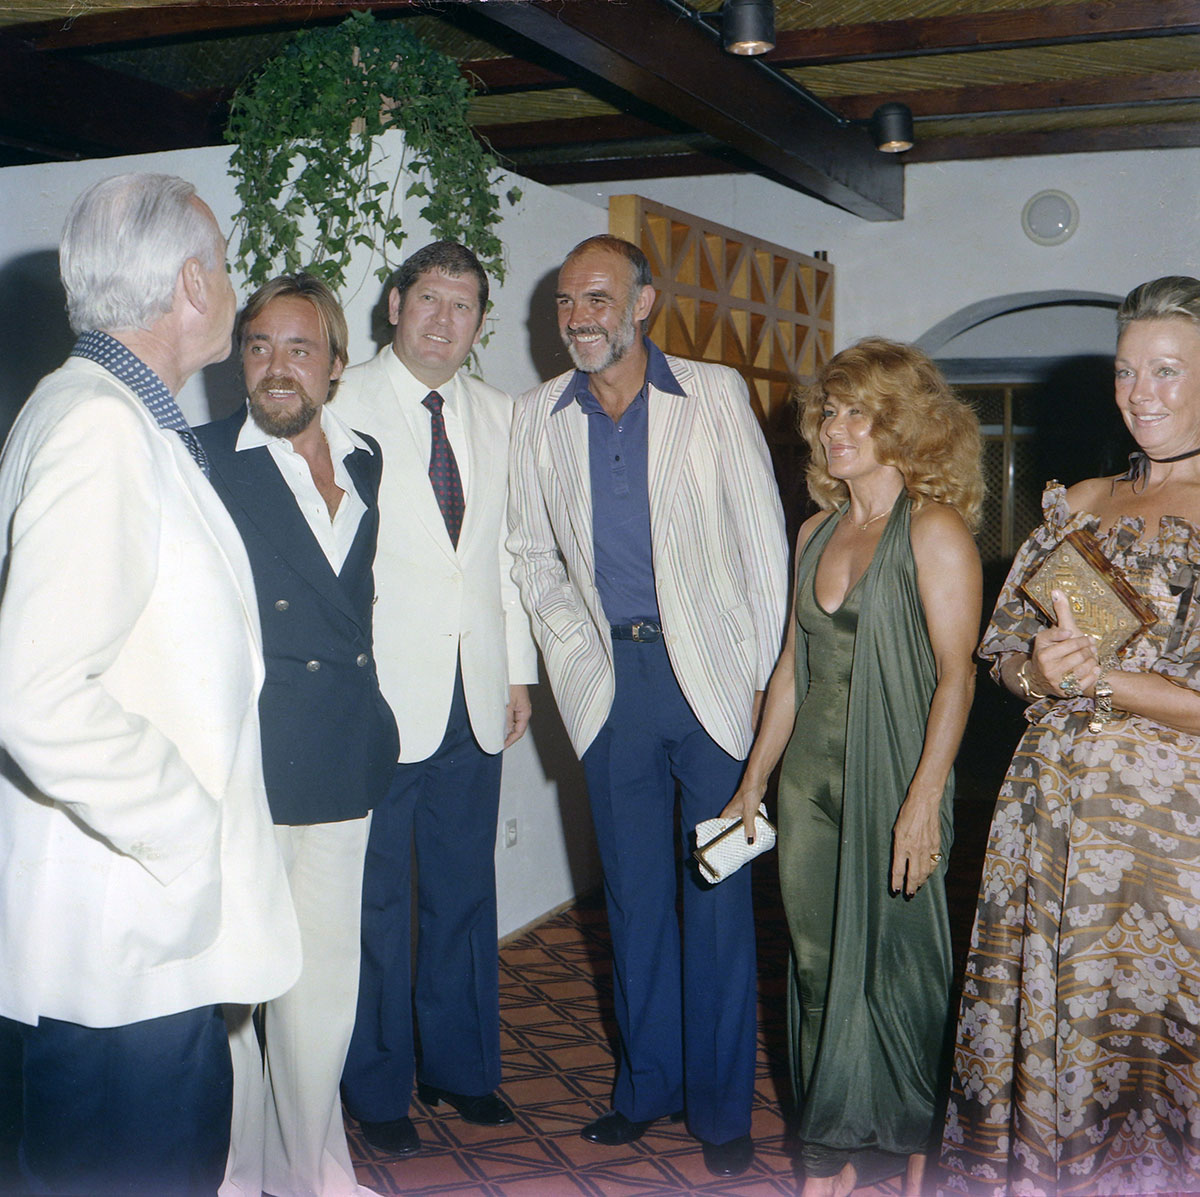 Sean Connery arrives at the Puente Romano hotel